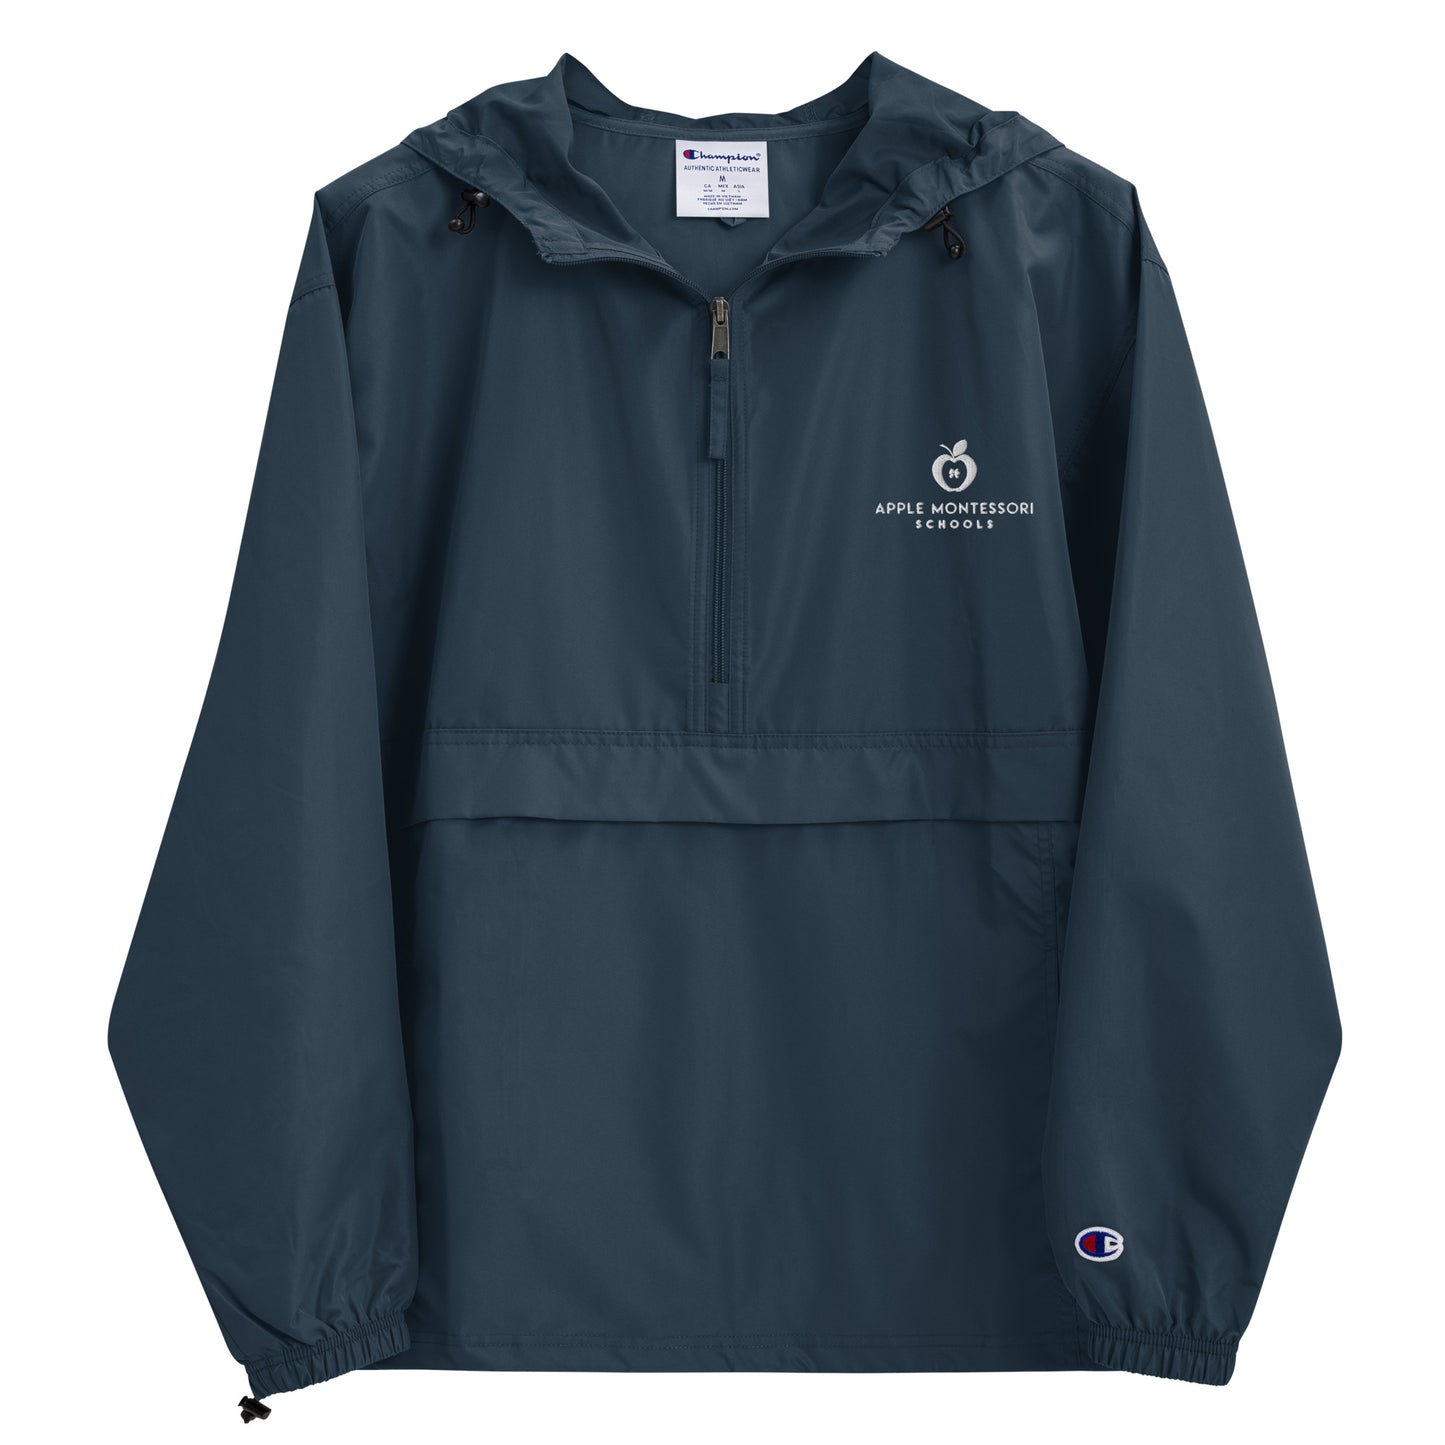 Apple Montessori Schools Embroidered Champion Packable Jacket